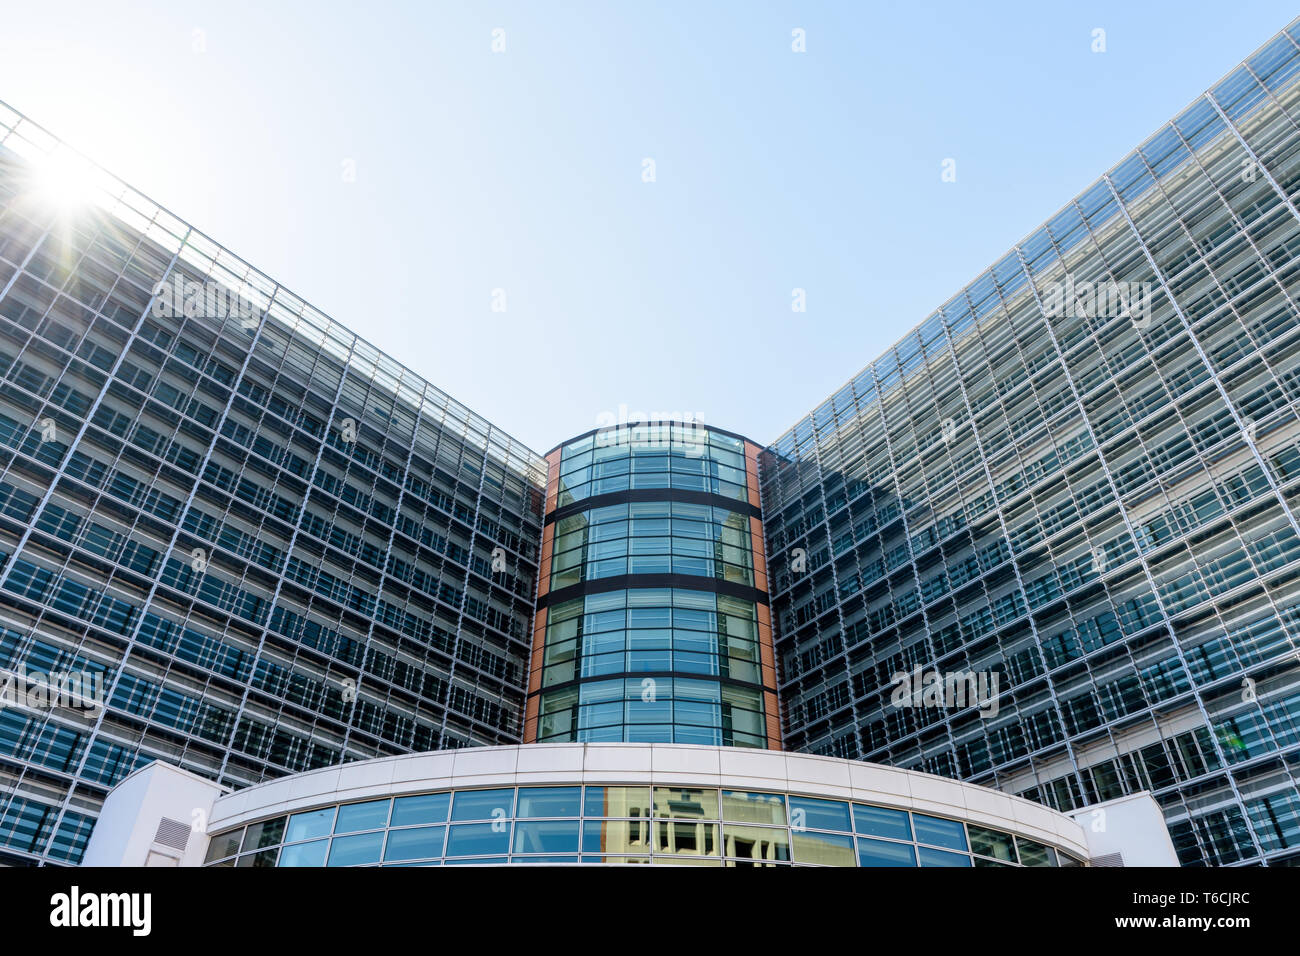 Low angle view of the central core of the Berlaymont building, seat of the European Commission in Brussels, Belgium. Stock Photo